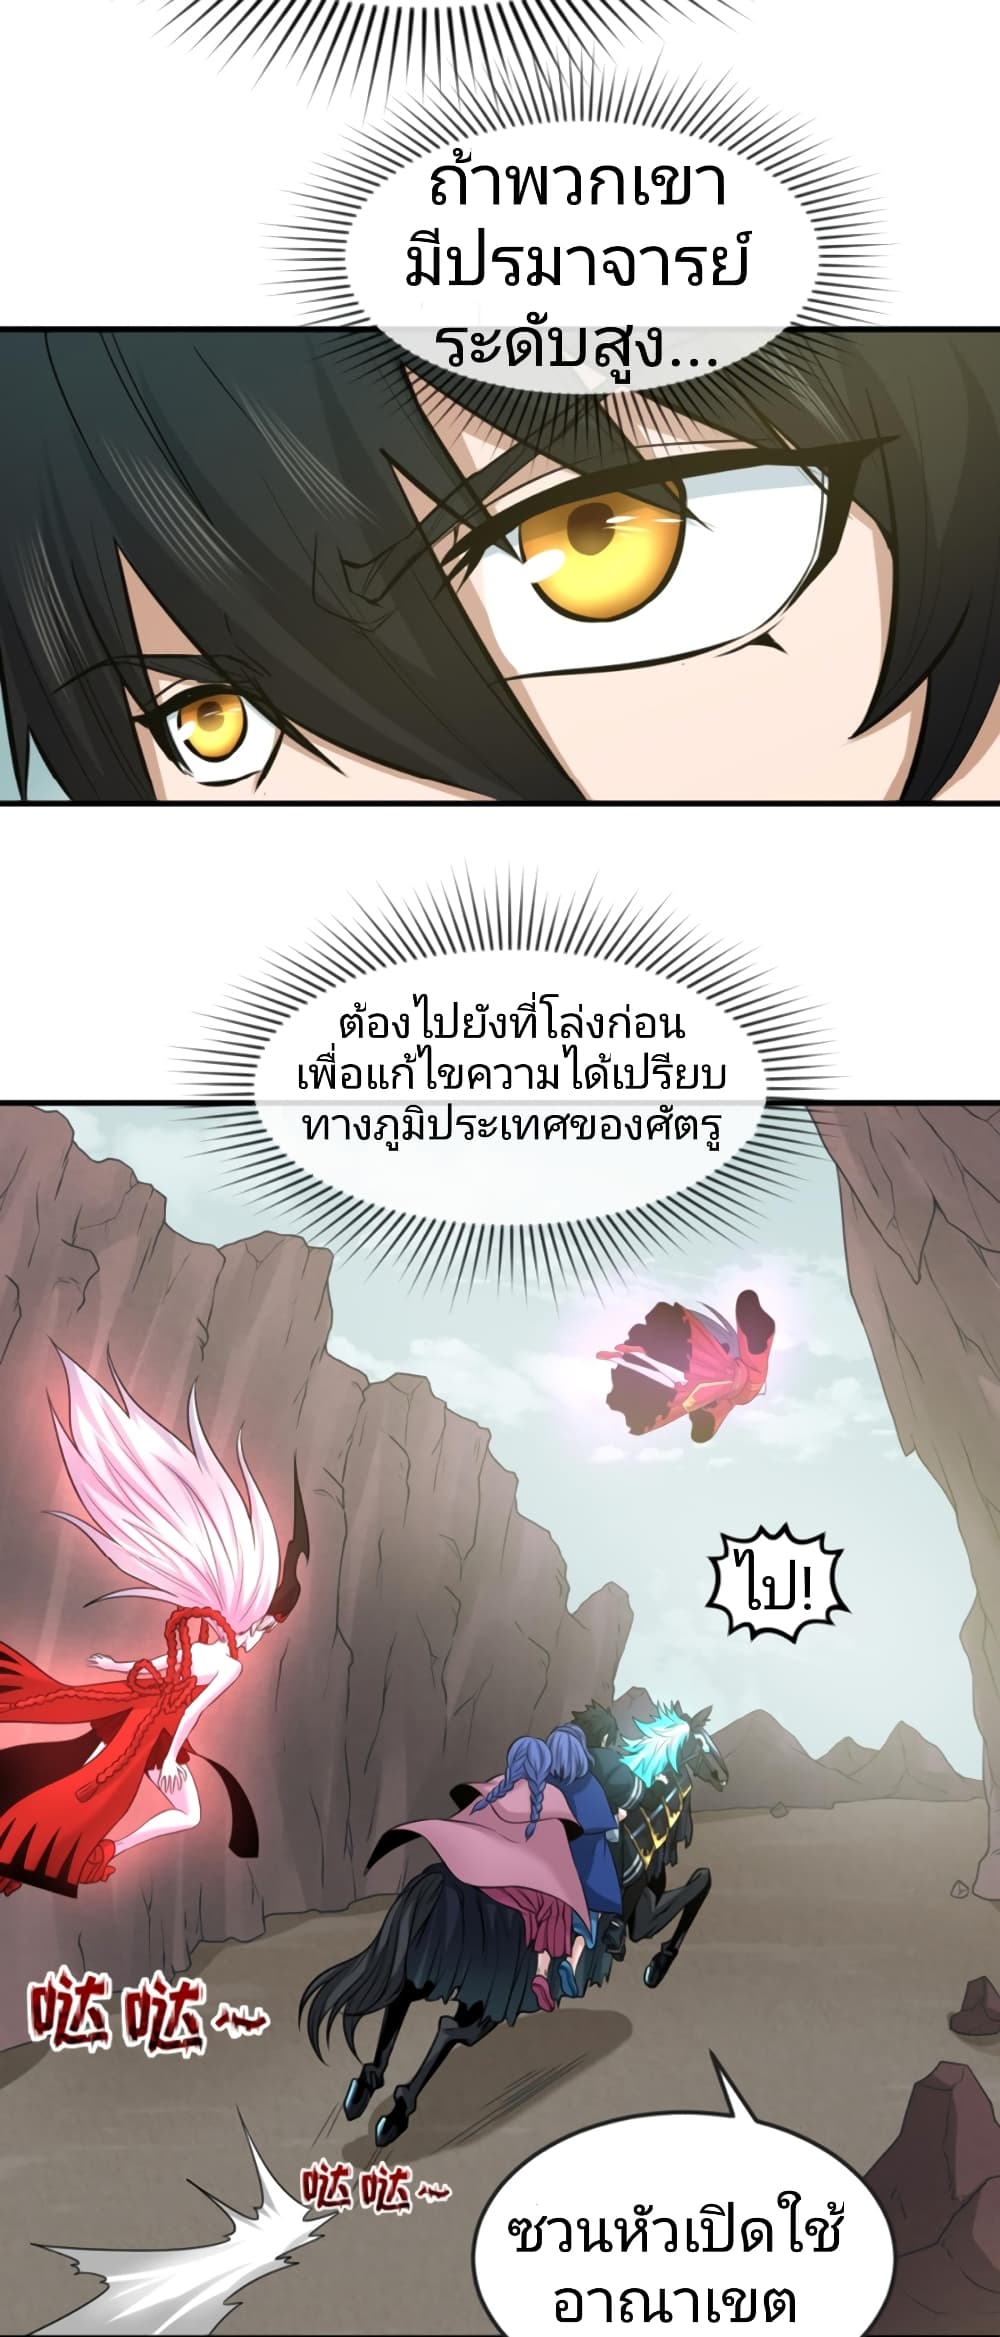 The Age of Ghost Spirits à¸à¸­à¸à¸à¸µà¹ 42 (7)